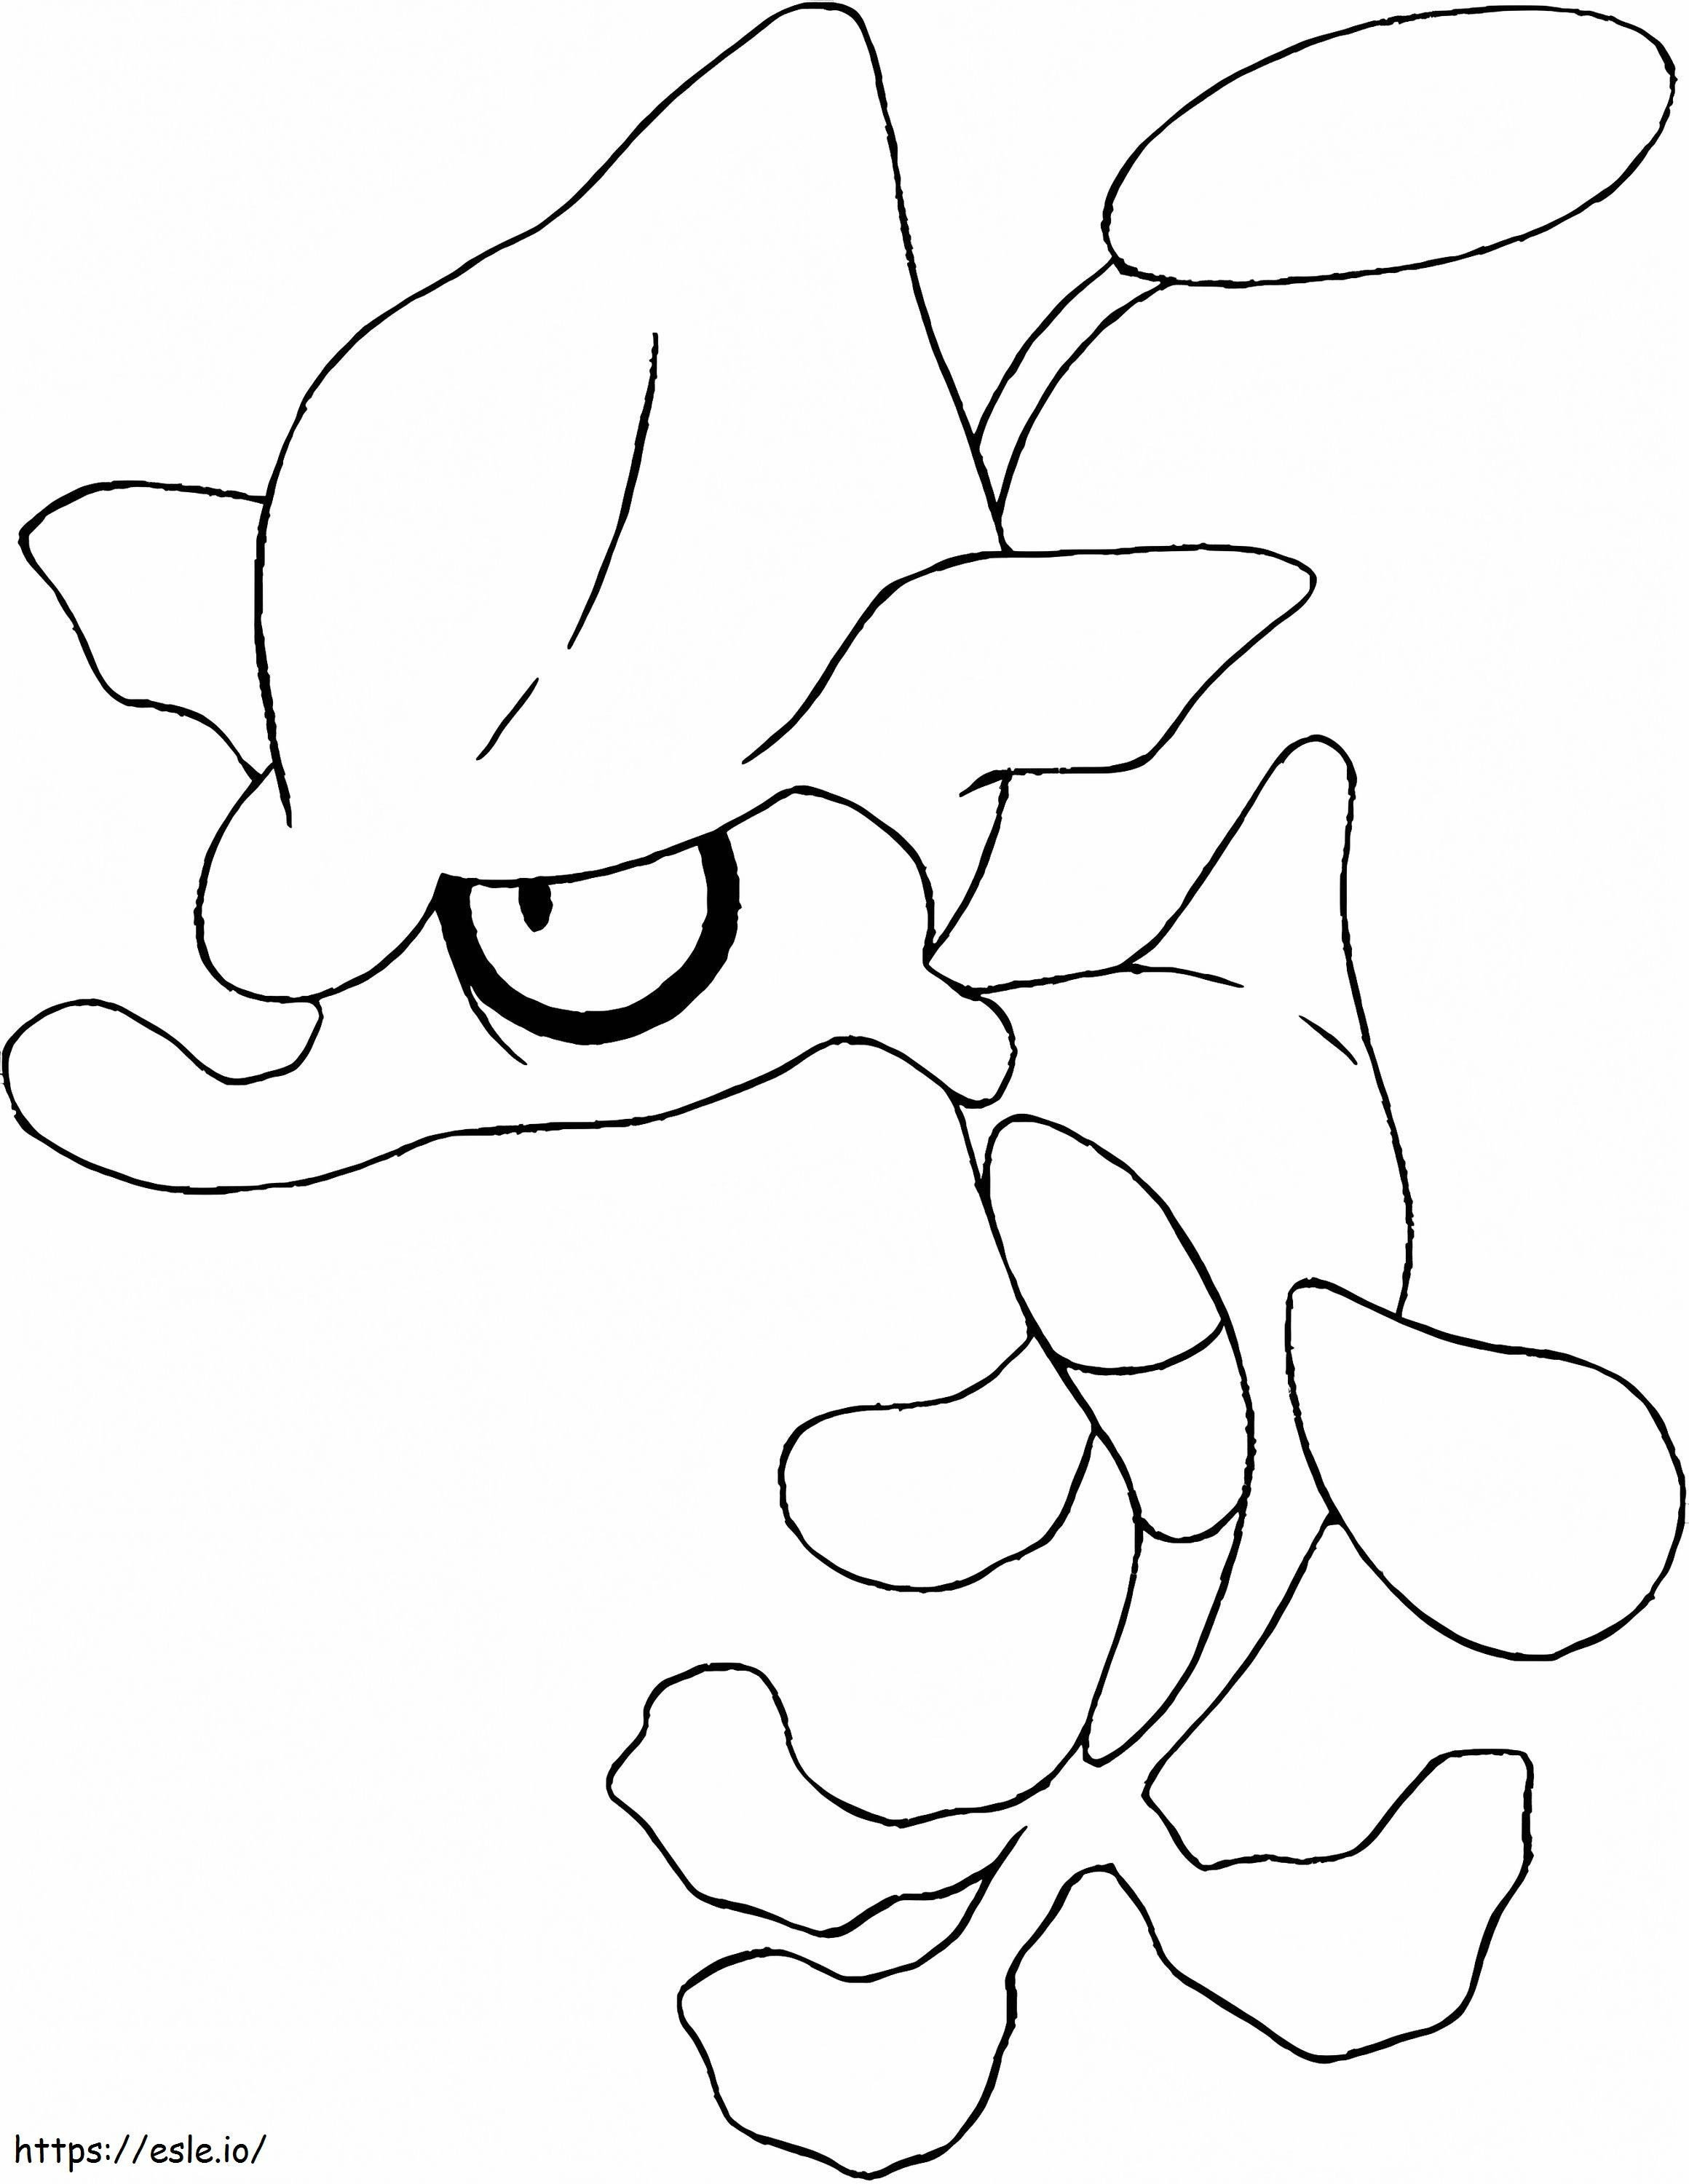 Peel 1 coloring page